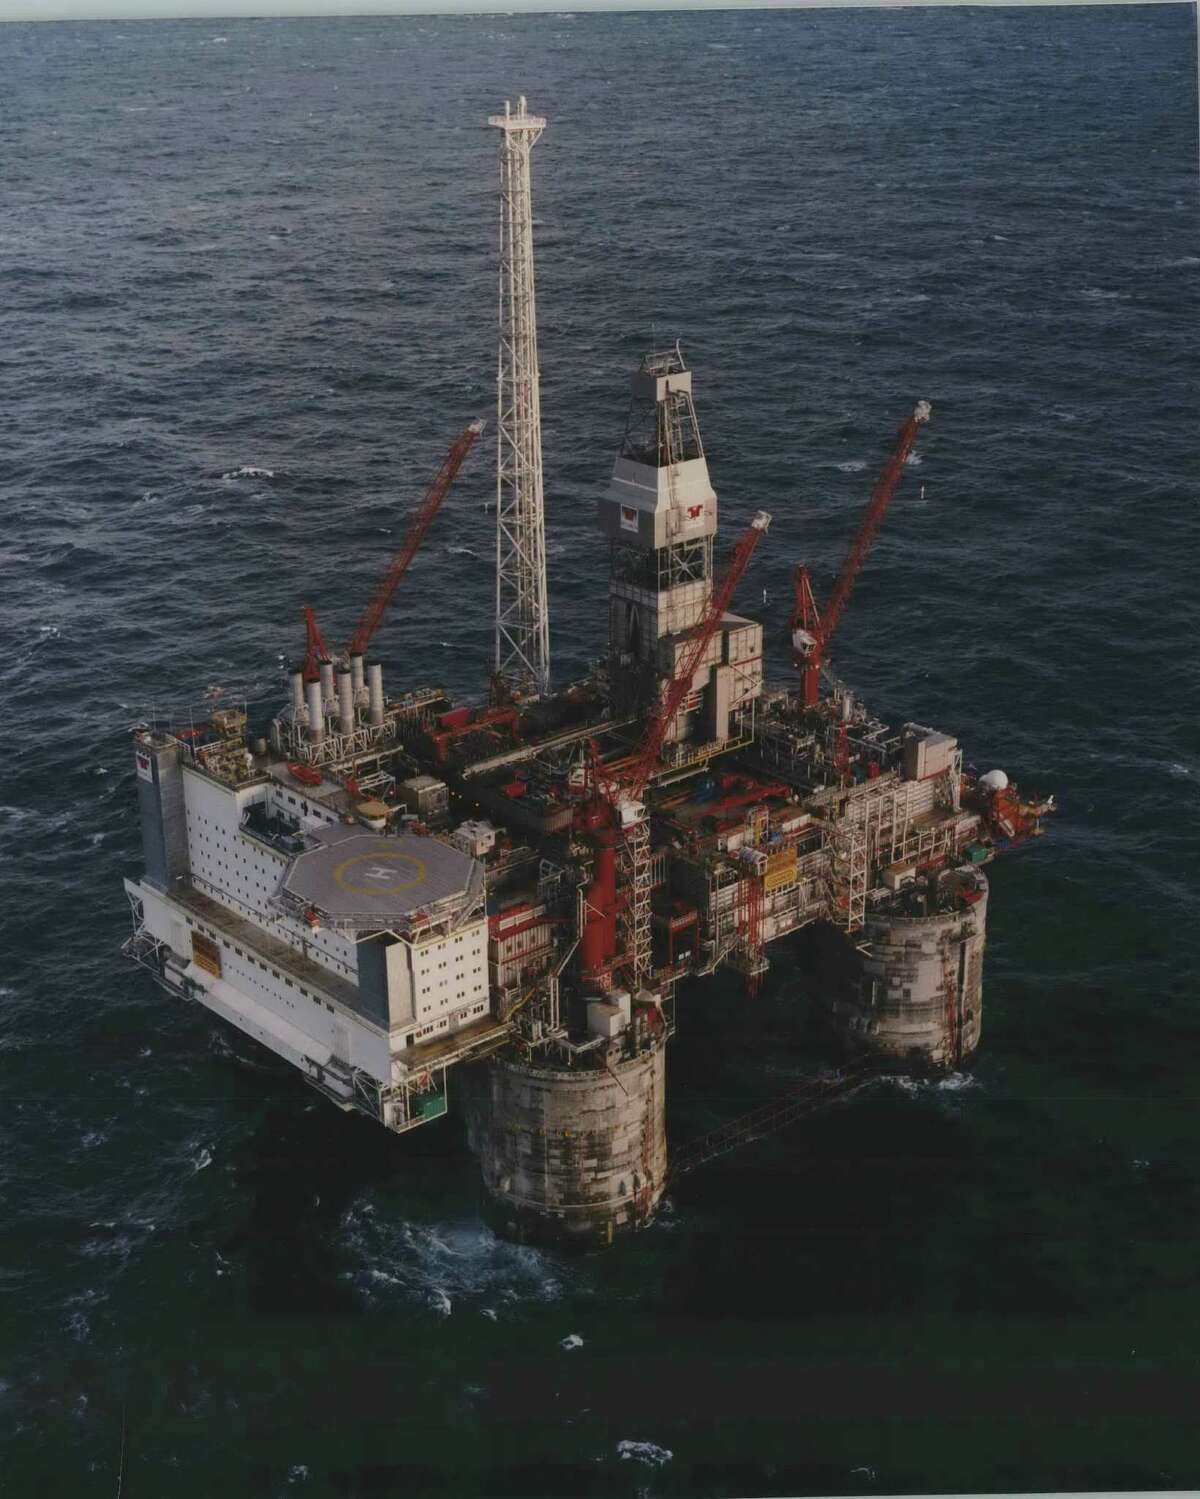 Concrete Evidence - The world's first concrete Tension Leg Platform, developed by Conoco, is producing oil and gas from the Heidrun Field offshore Norway in 1150 feet of water. Located 70 miles south of the Arctic Circle, Heidrun is the world's northernmost offshore developed field. Heidrun platform, located 70 miles south of the Arctic Circle, is the world's first floating production platform made of concrete. Herding Development Project. 00521 14 CN 24.09.95 Heidrun TLP; Heidrun Field, , Jan B's Foto as